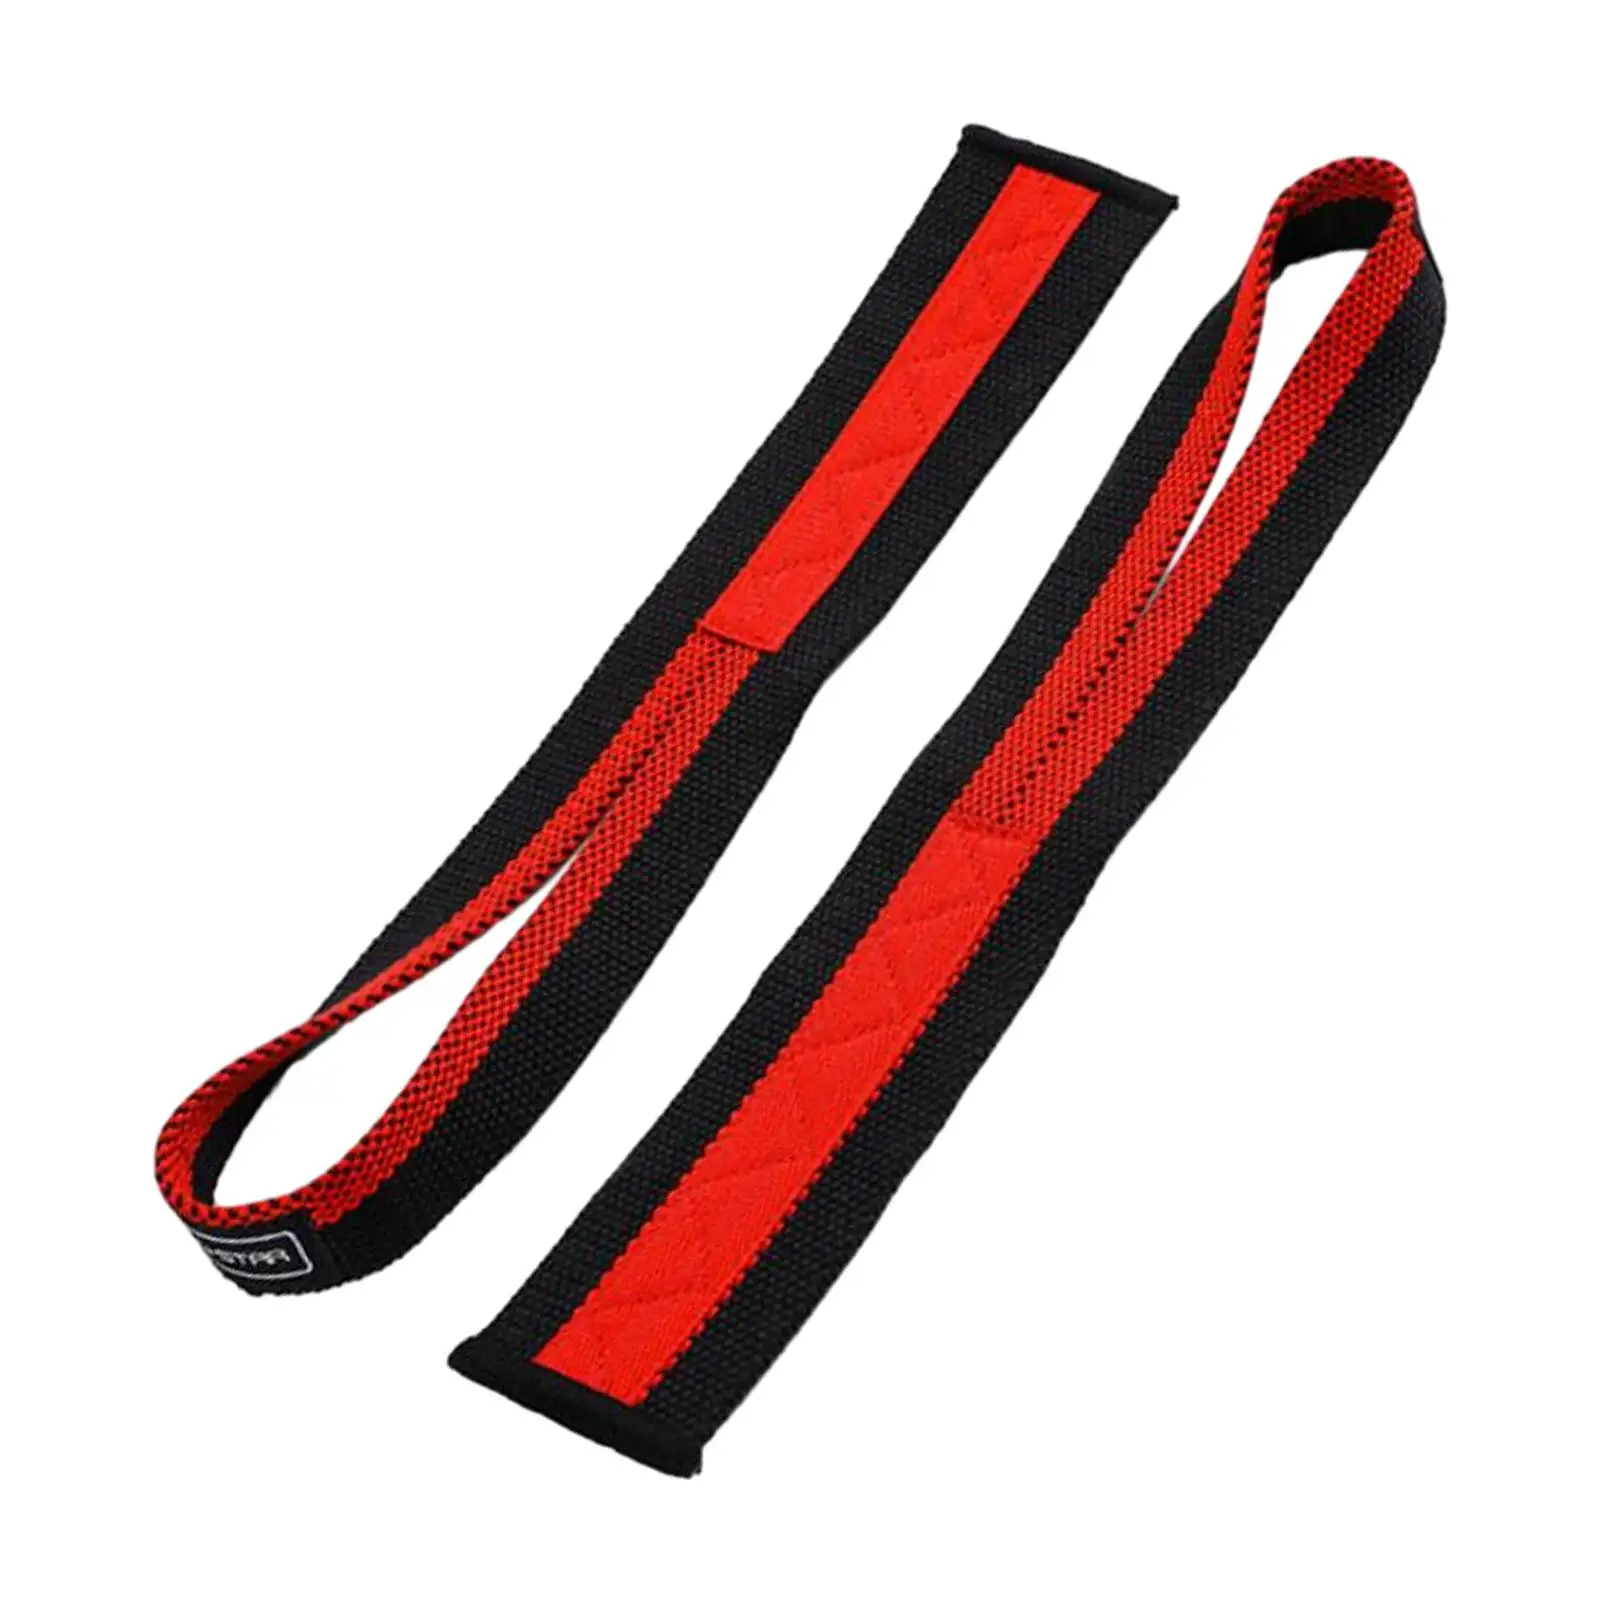 2Pcs Weight Lifting Straps Wrist Support Wrap Non Slip Hand Grip Band Wrist Straps for Weightlifting/ Powerlifting/ Pull up